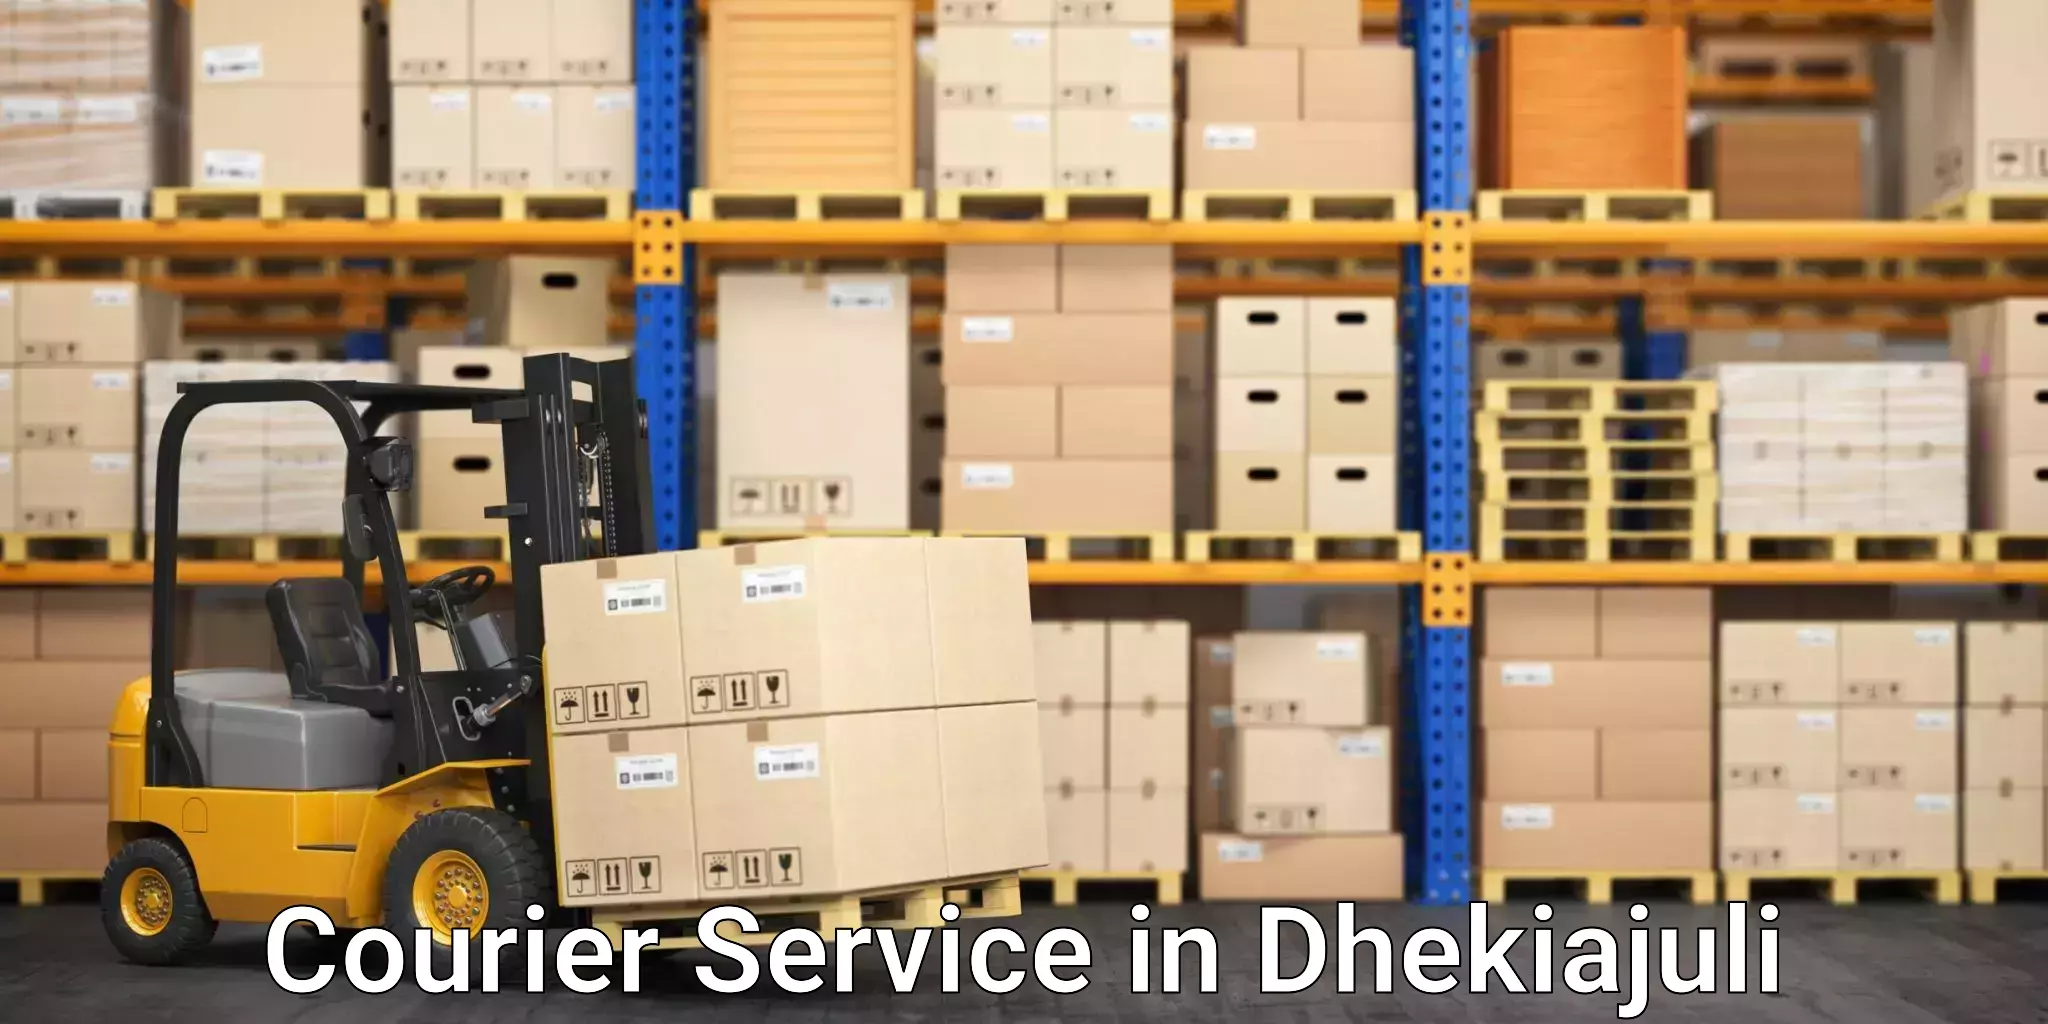 Courier dispatch services in Dhekiajuli